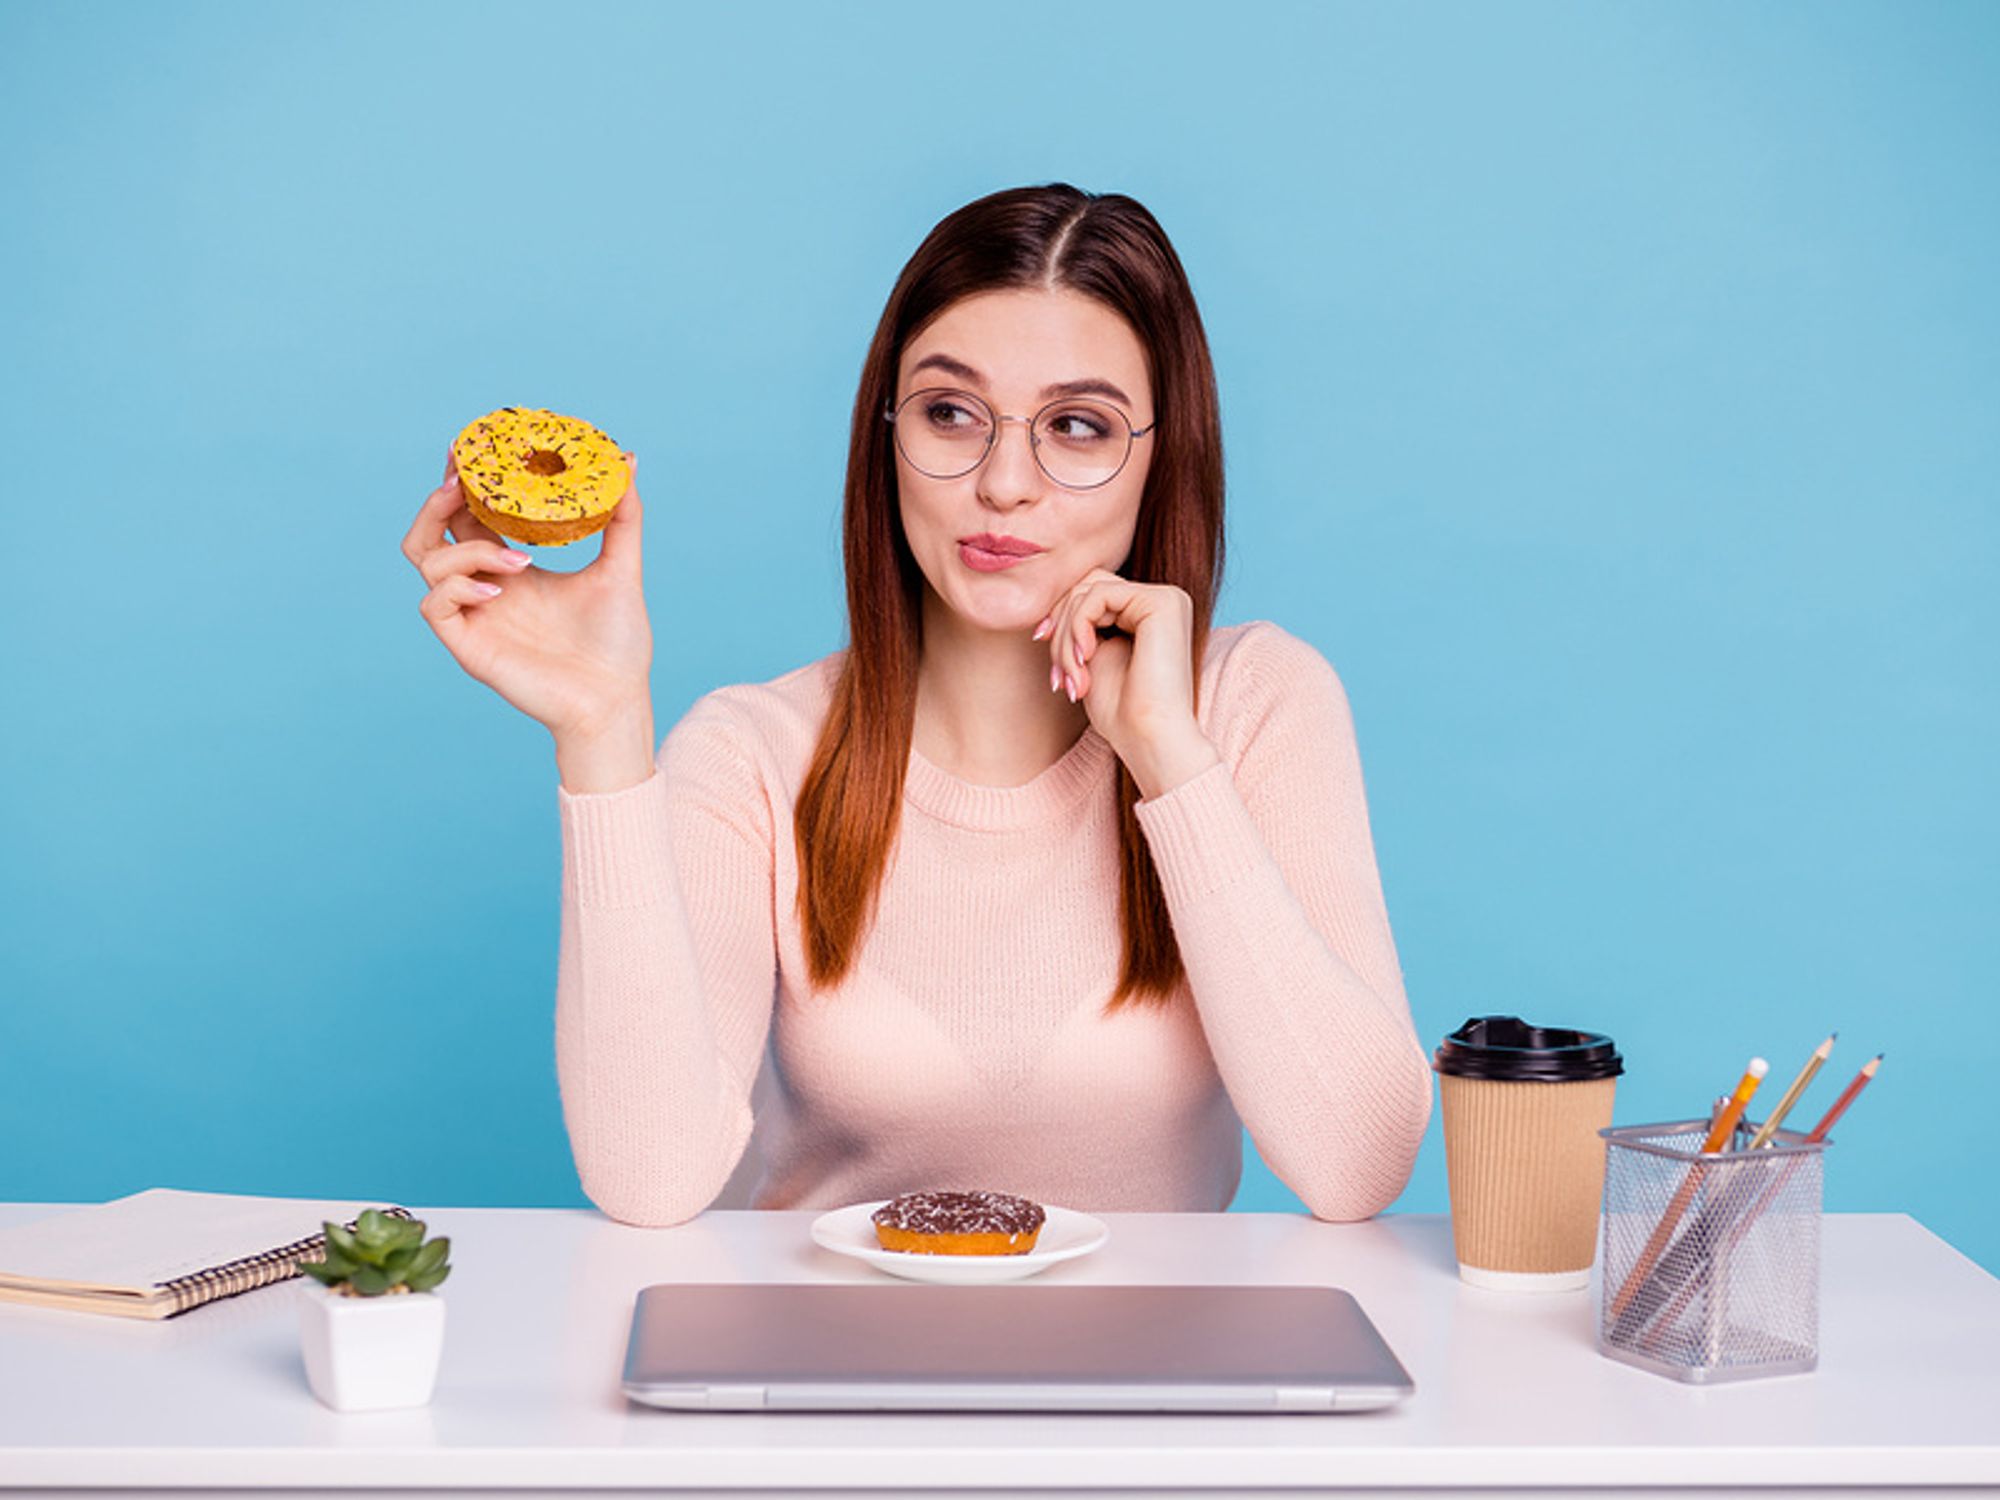 3 Easy Tips To Stop Sugar Cravings At Work - Work It Daily